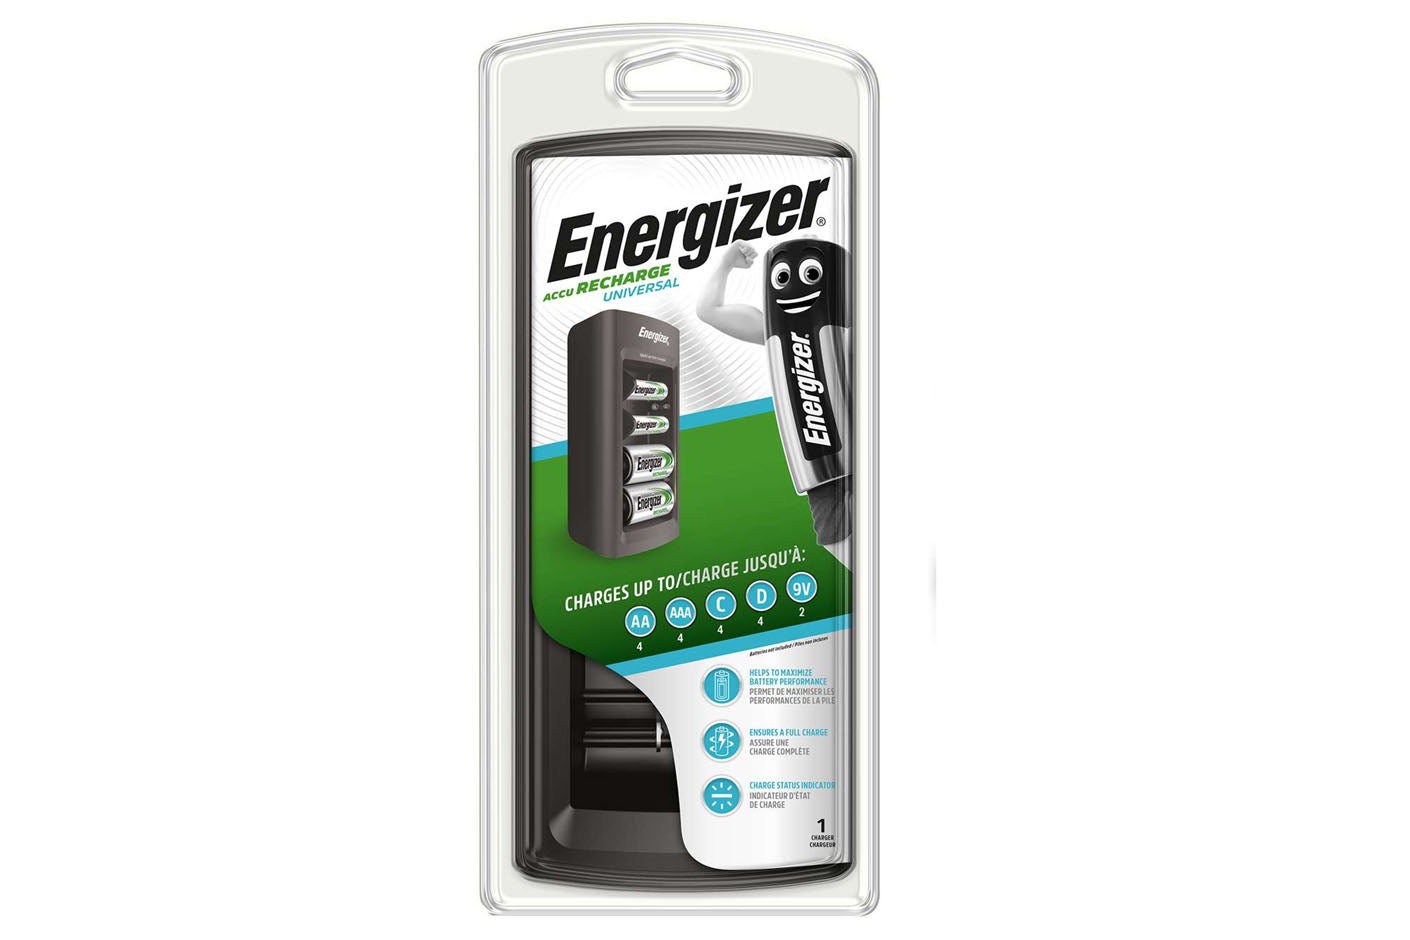 Energizer Universal Charger for AA / AAA / C / D / 9V Rechargeable